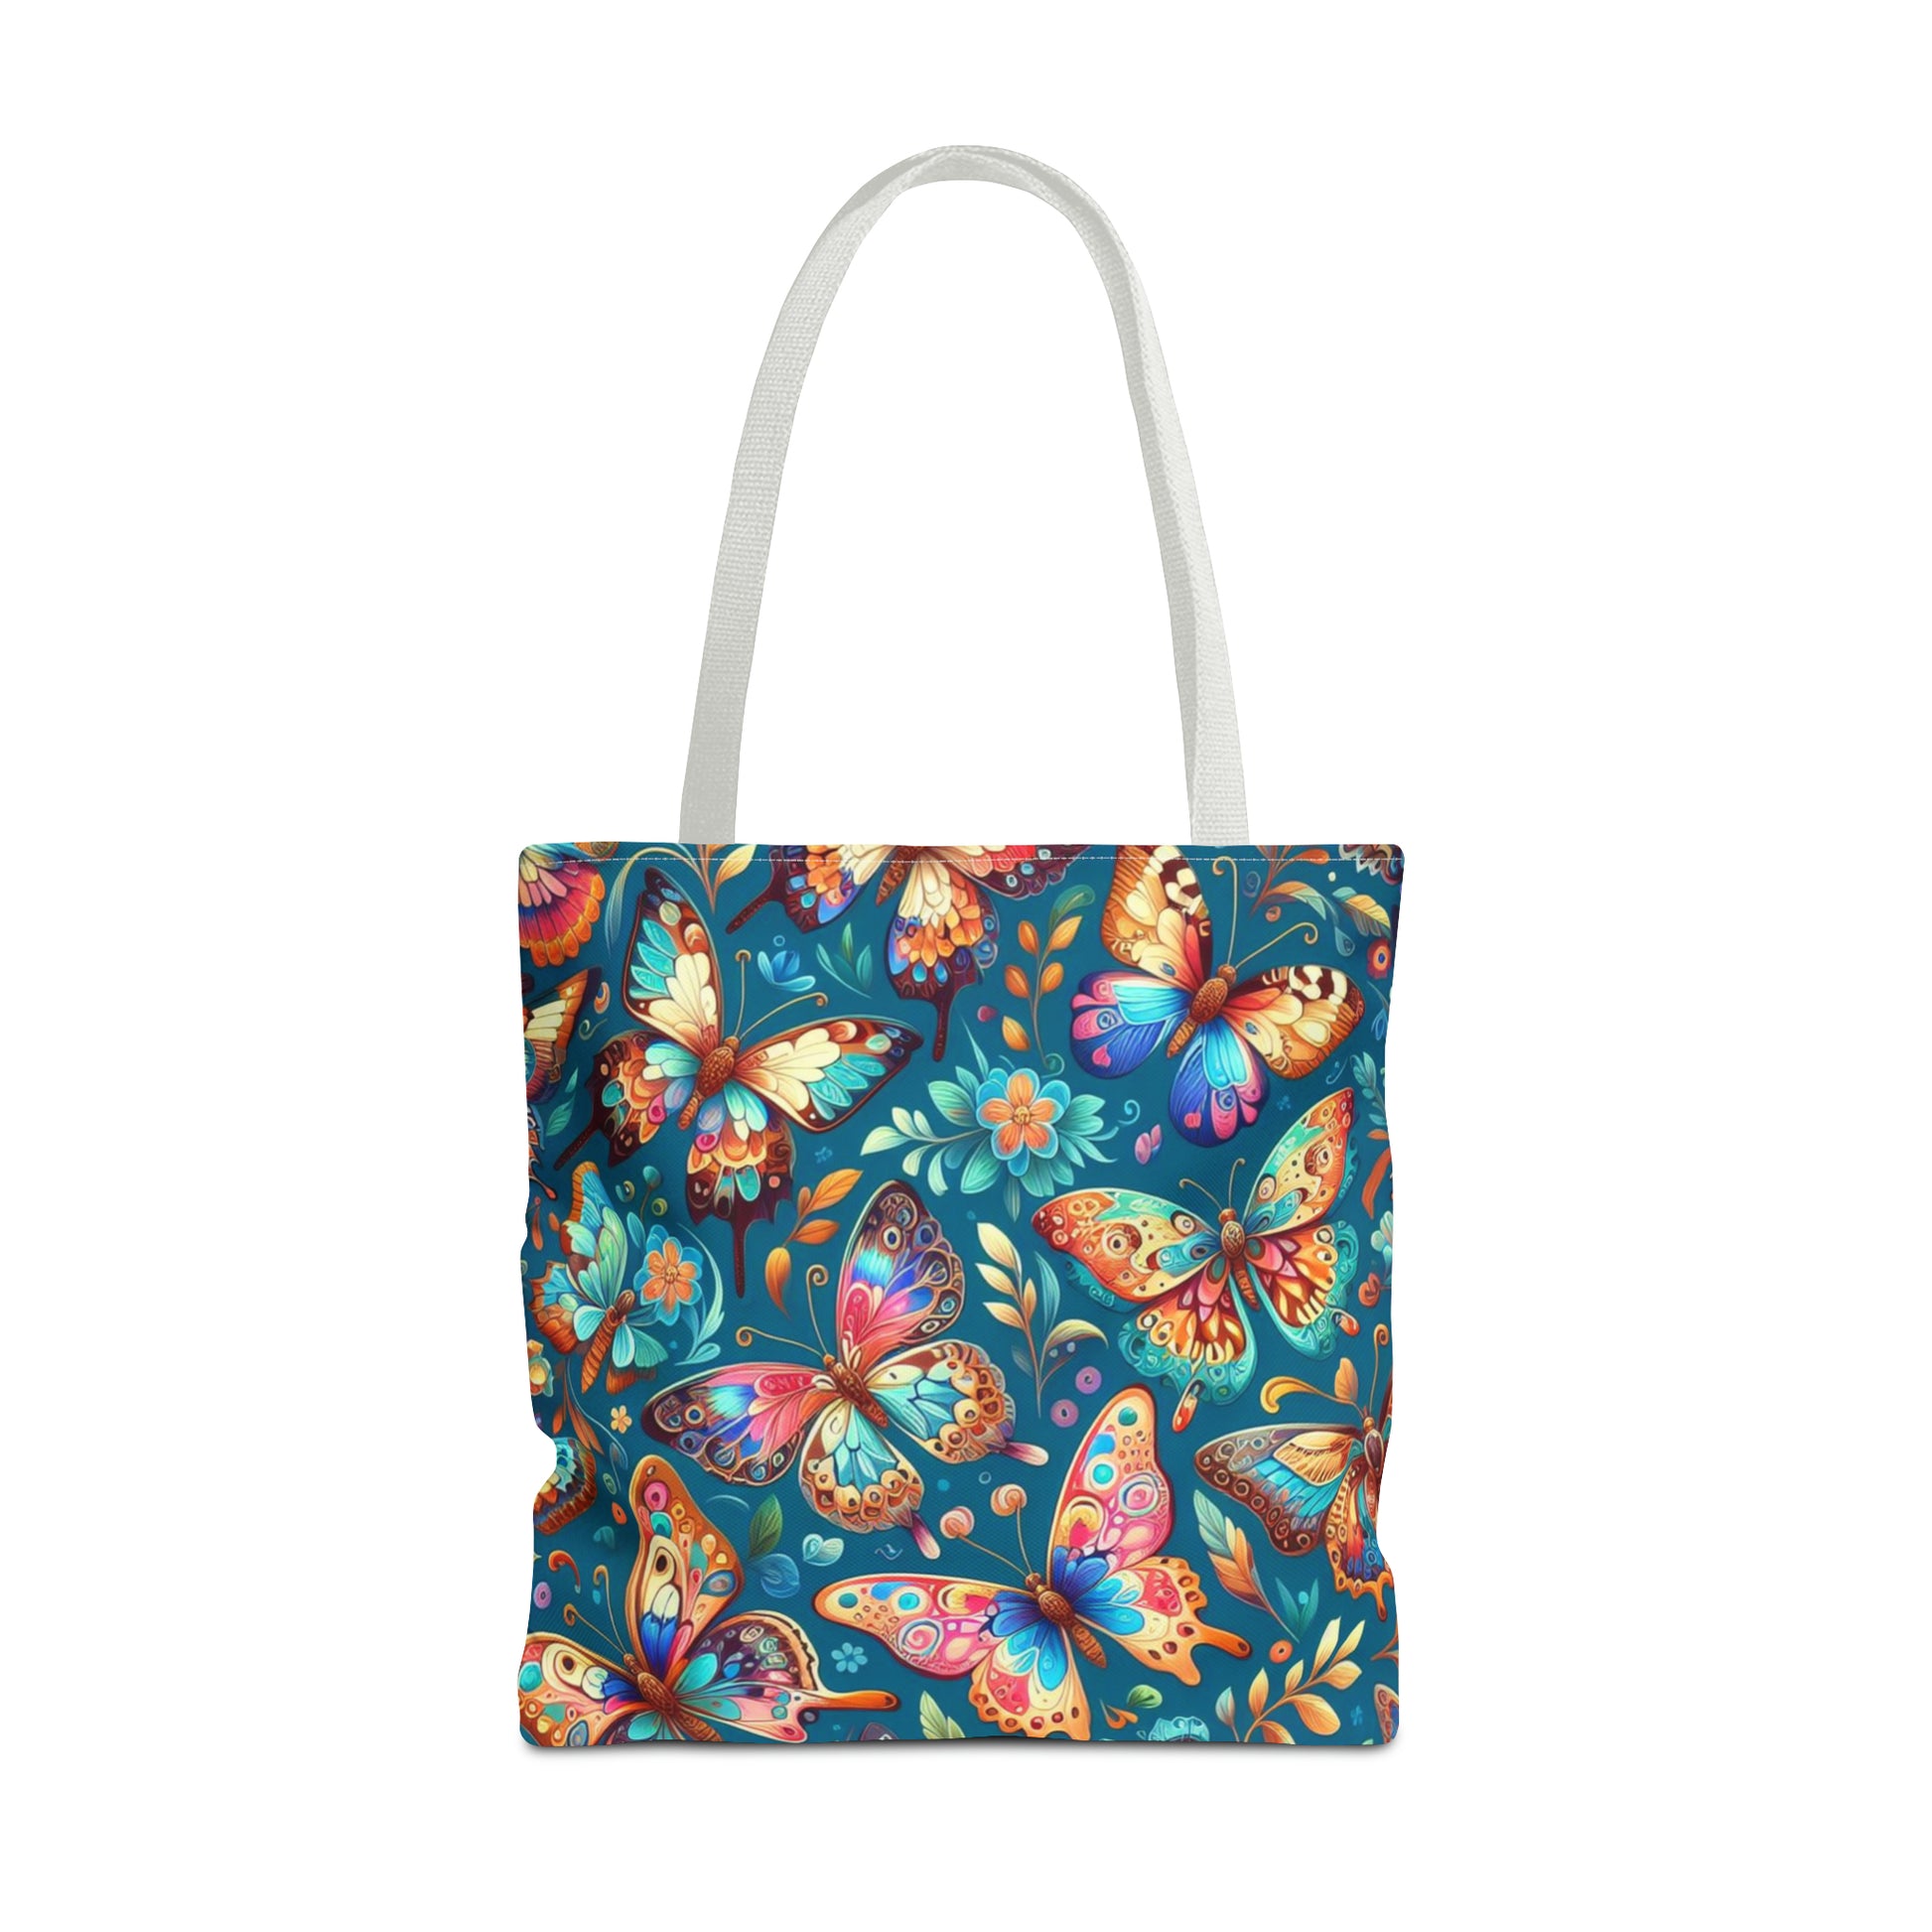 Personalized Tote Bag for daily use (Butterflies with blue background)